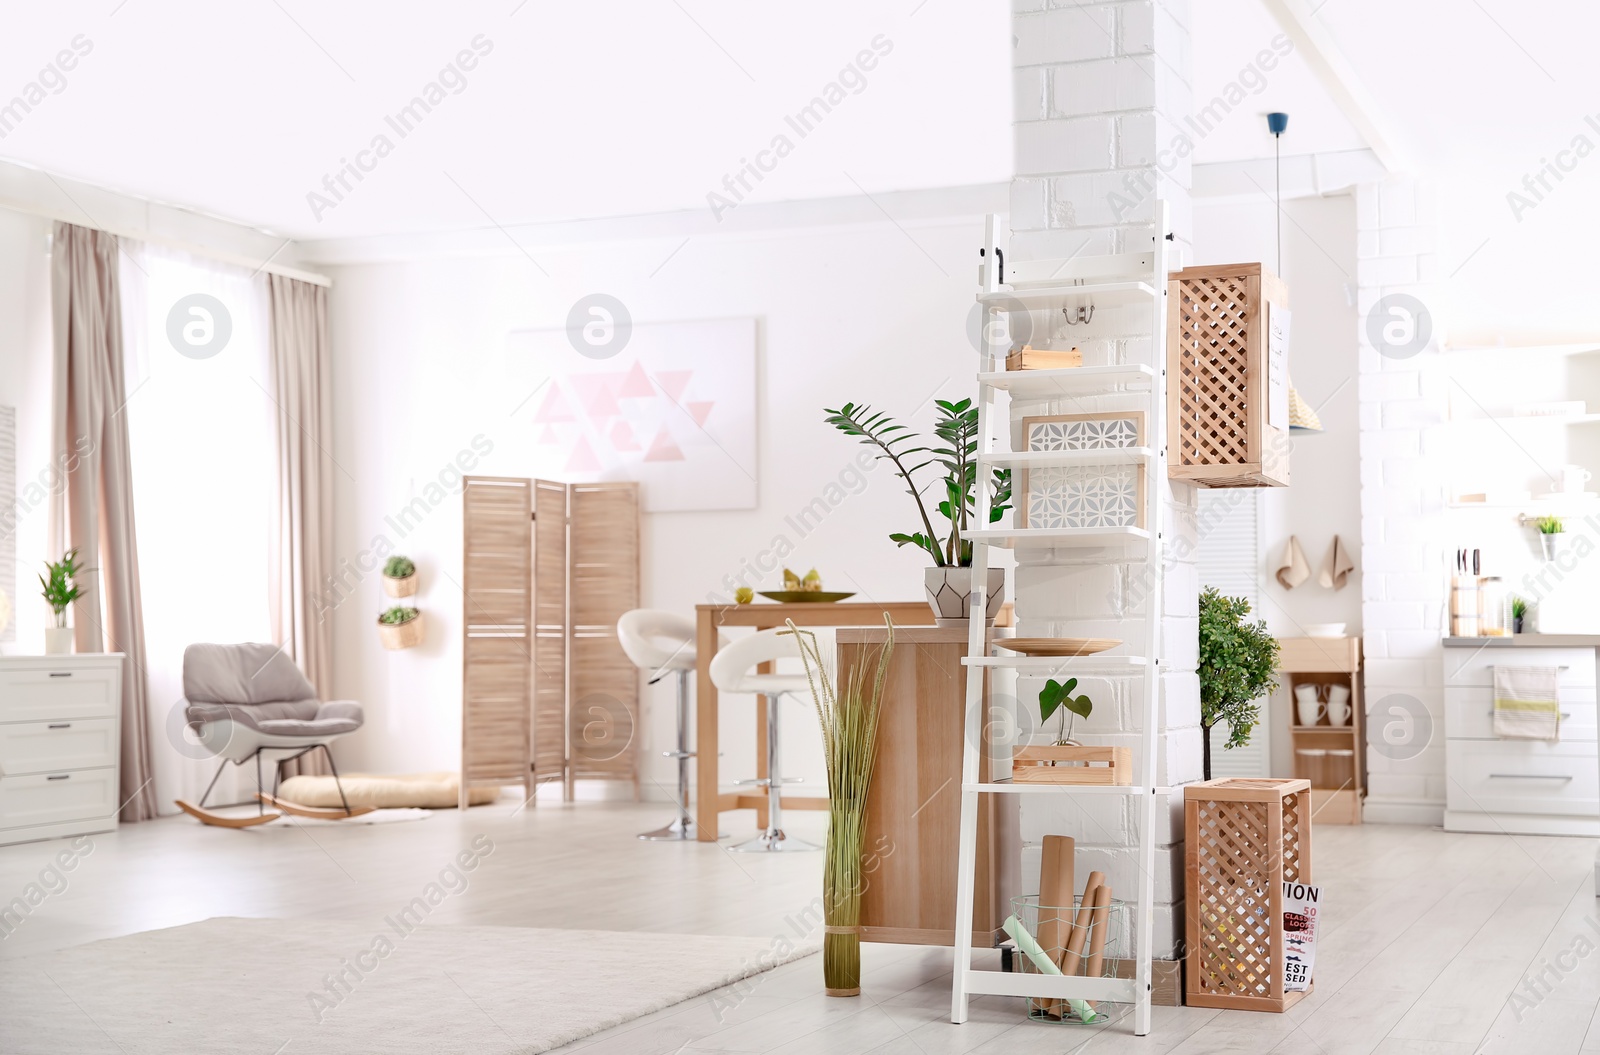 Photo of Modern eco style interior with wooden crates and shelves